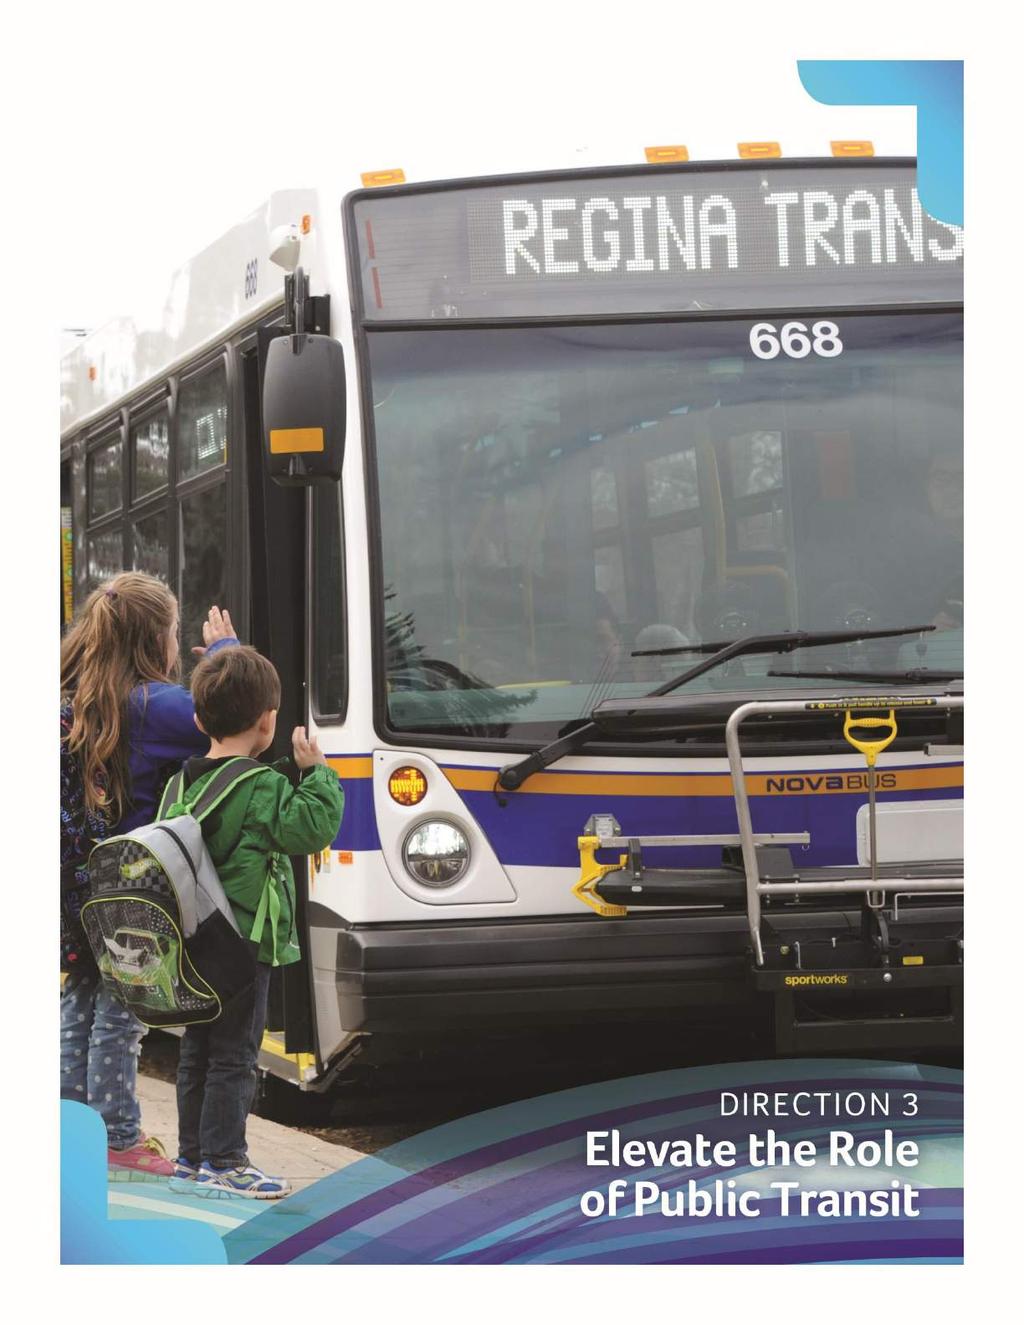 Elevate the Role of Public Transit